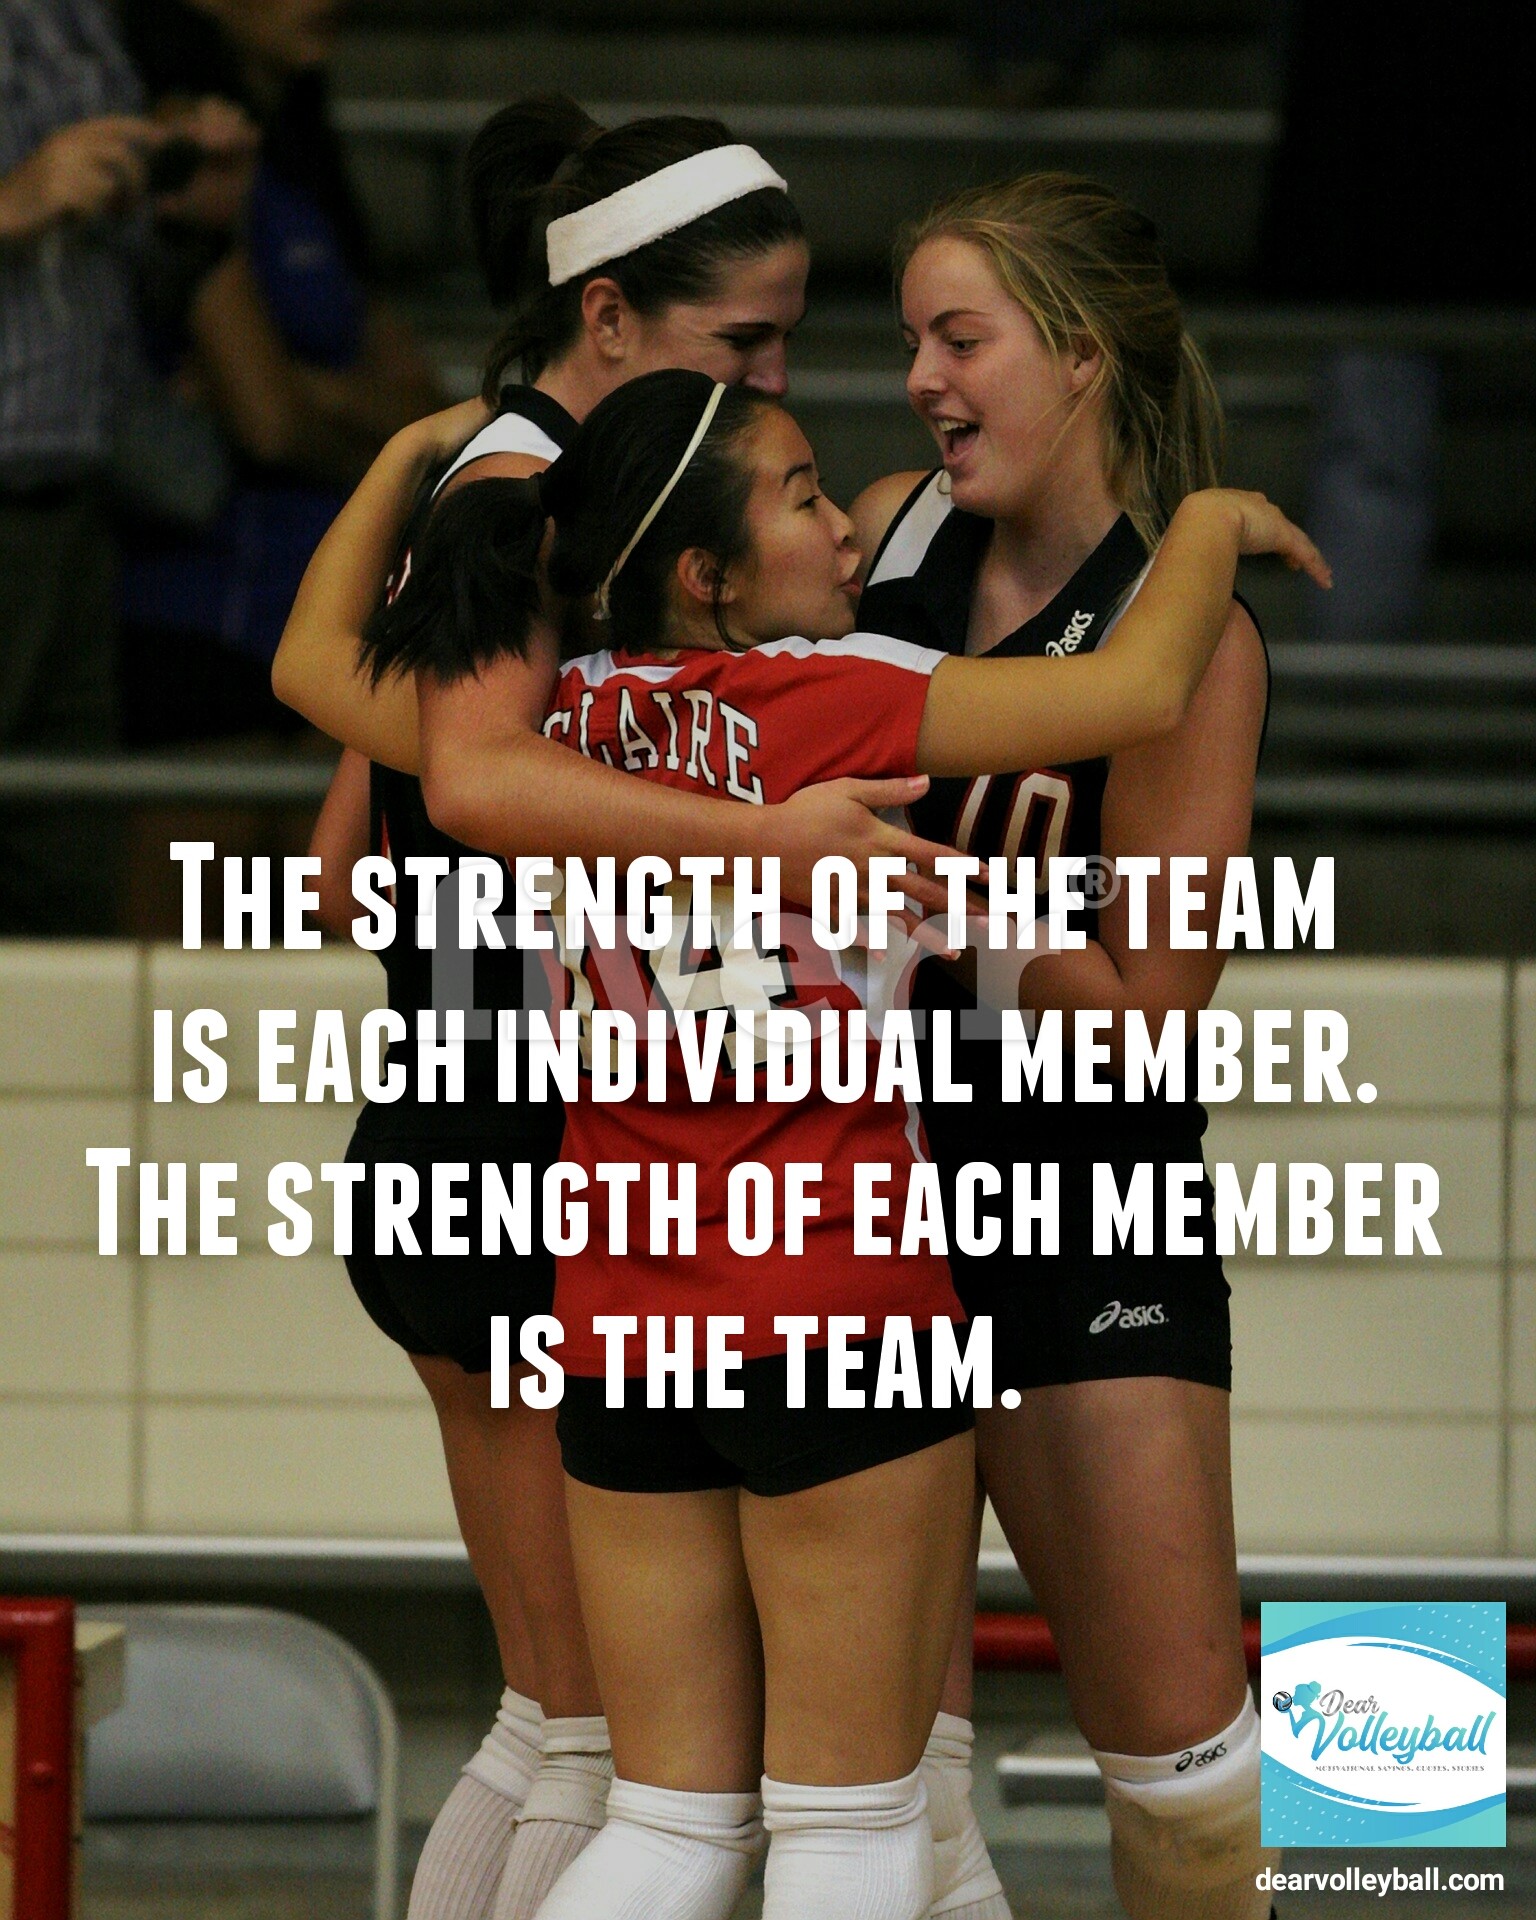 The strength of the team is each individual member. The strength of each member is the team and other volleyball coach quotes on DearVolleyball.com.